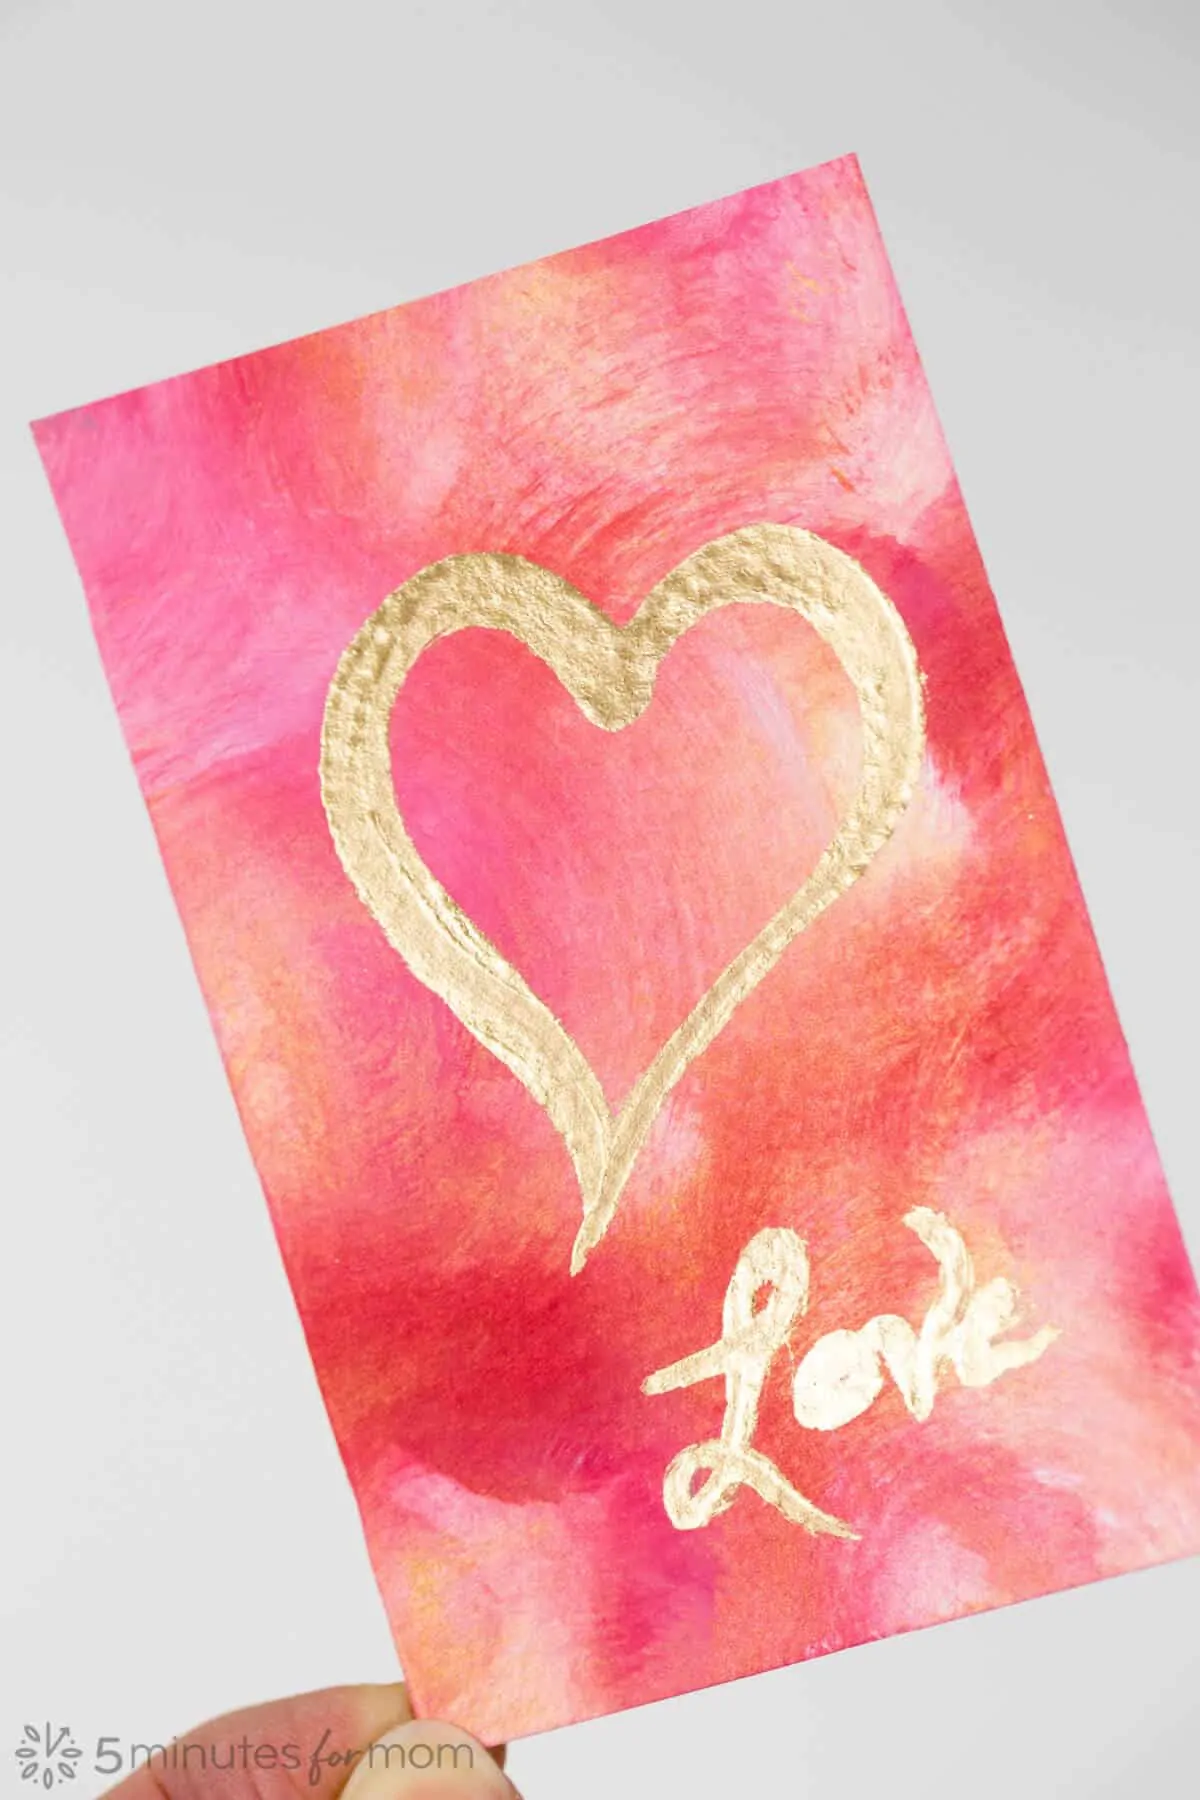 Valentine's Day Painting - An Easy Art Project With Stunning Results! - 5 Minutes for Mom